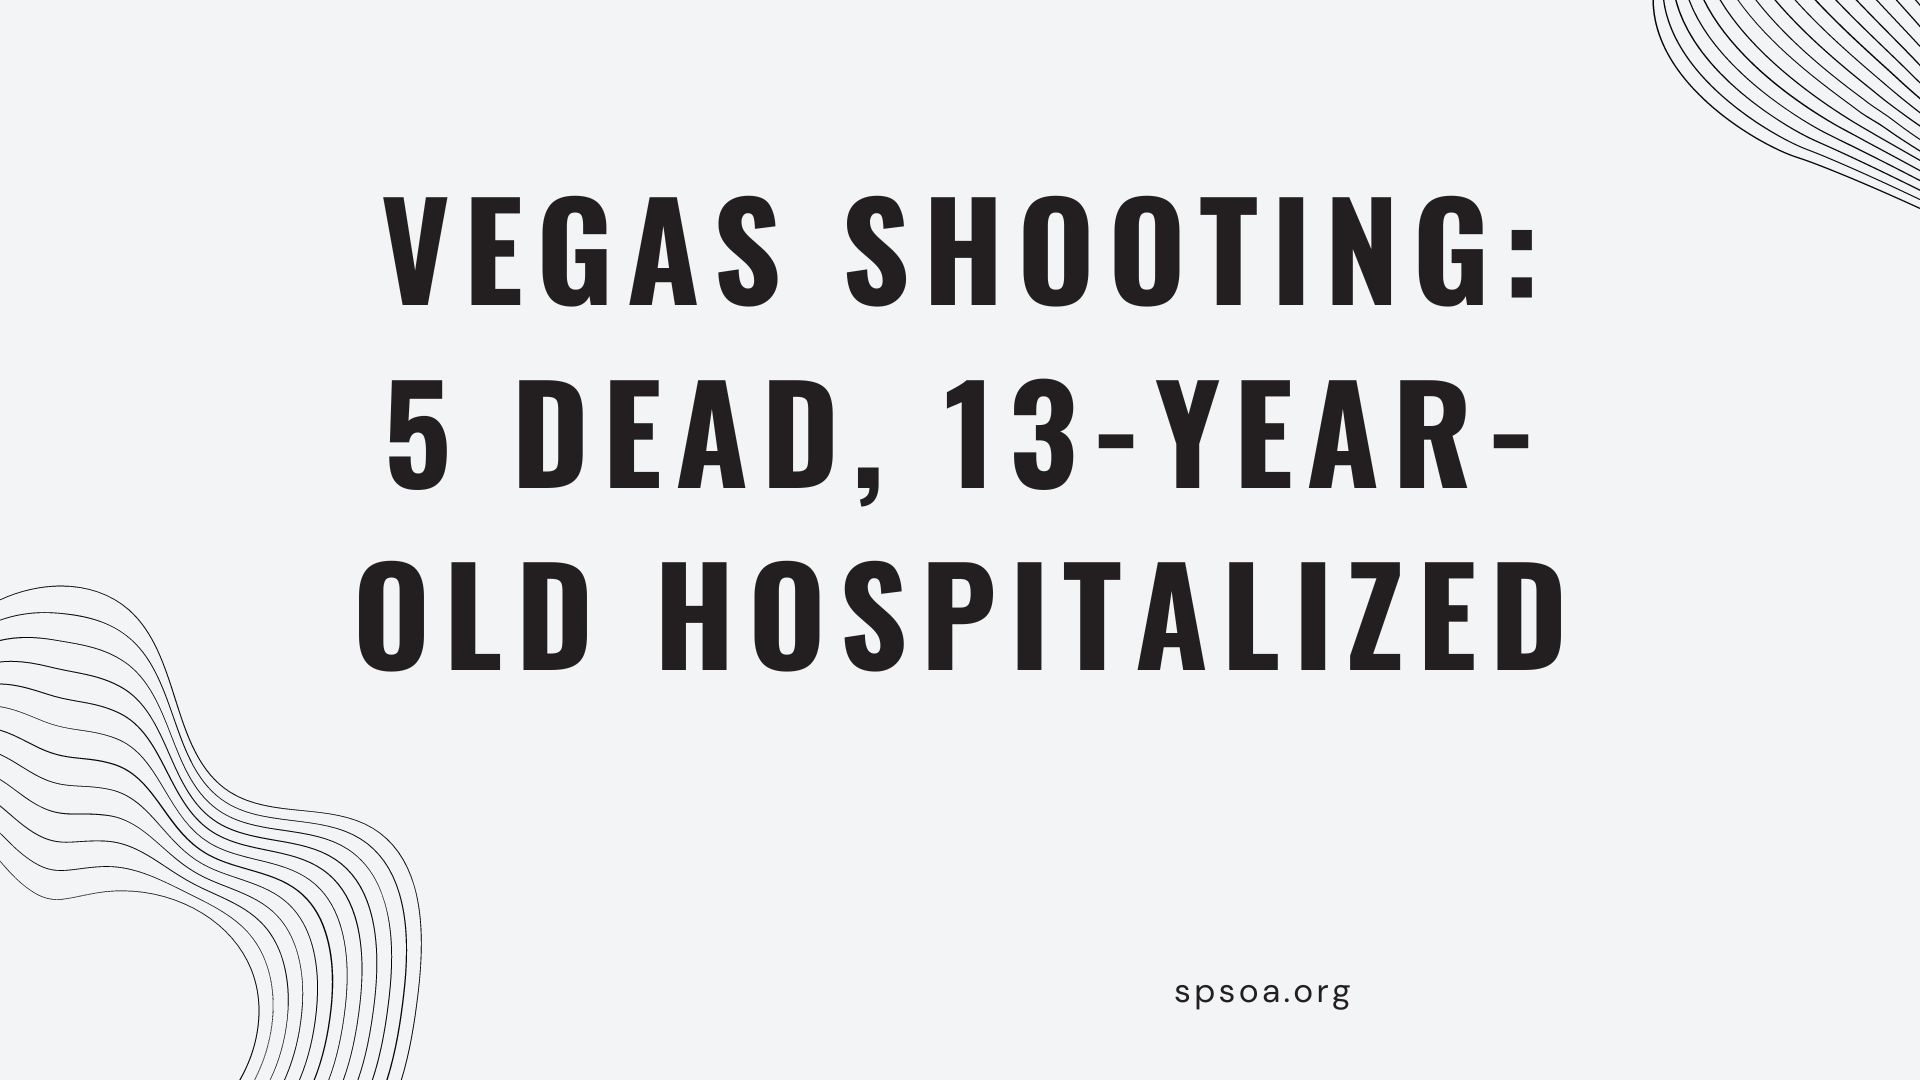 Vegas shooting 5 dead, 13-year-old hospitalized